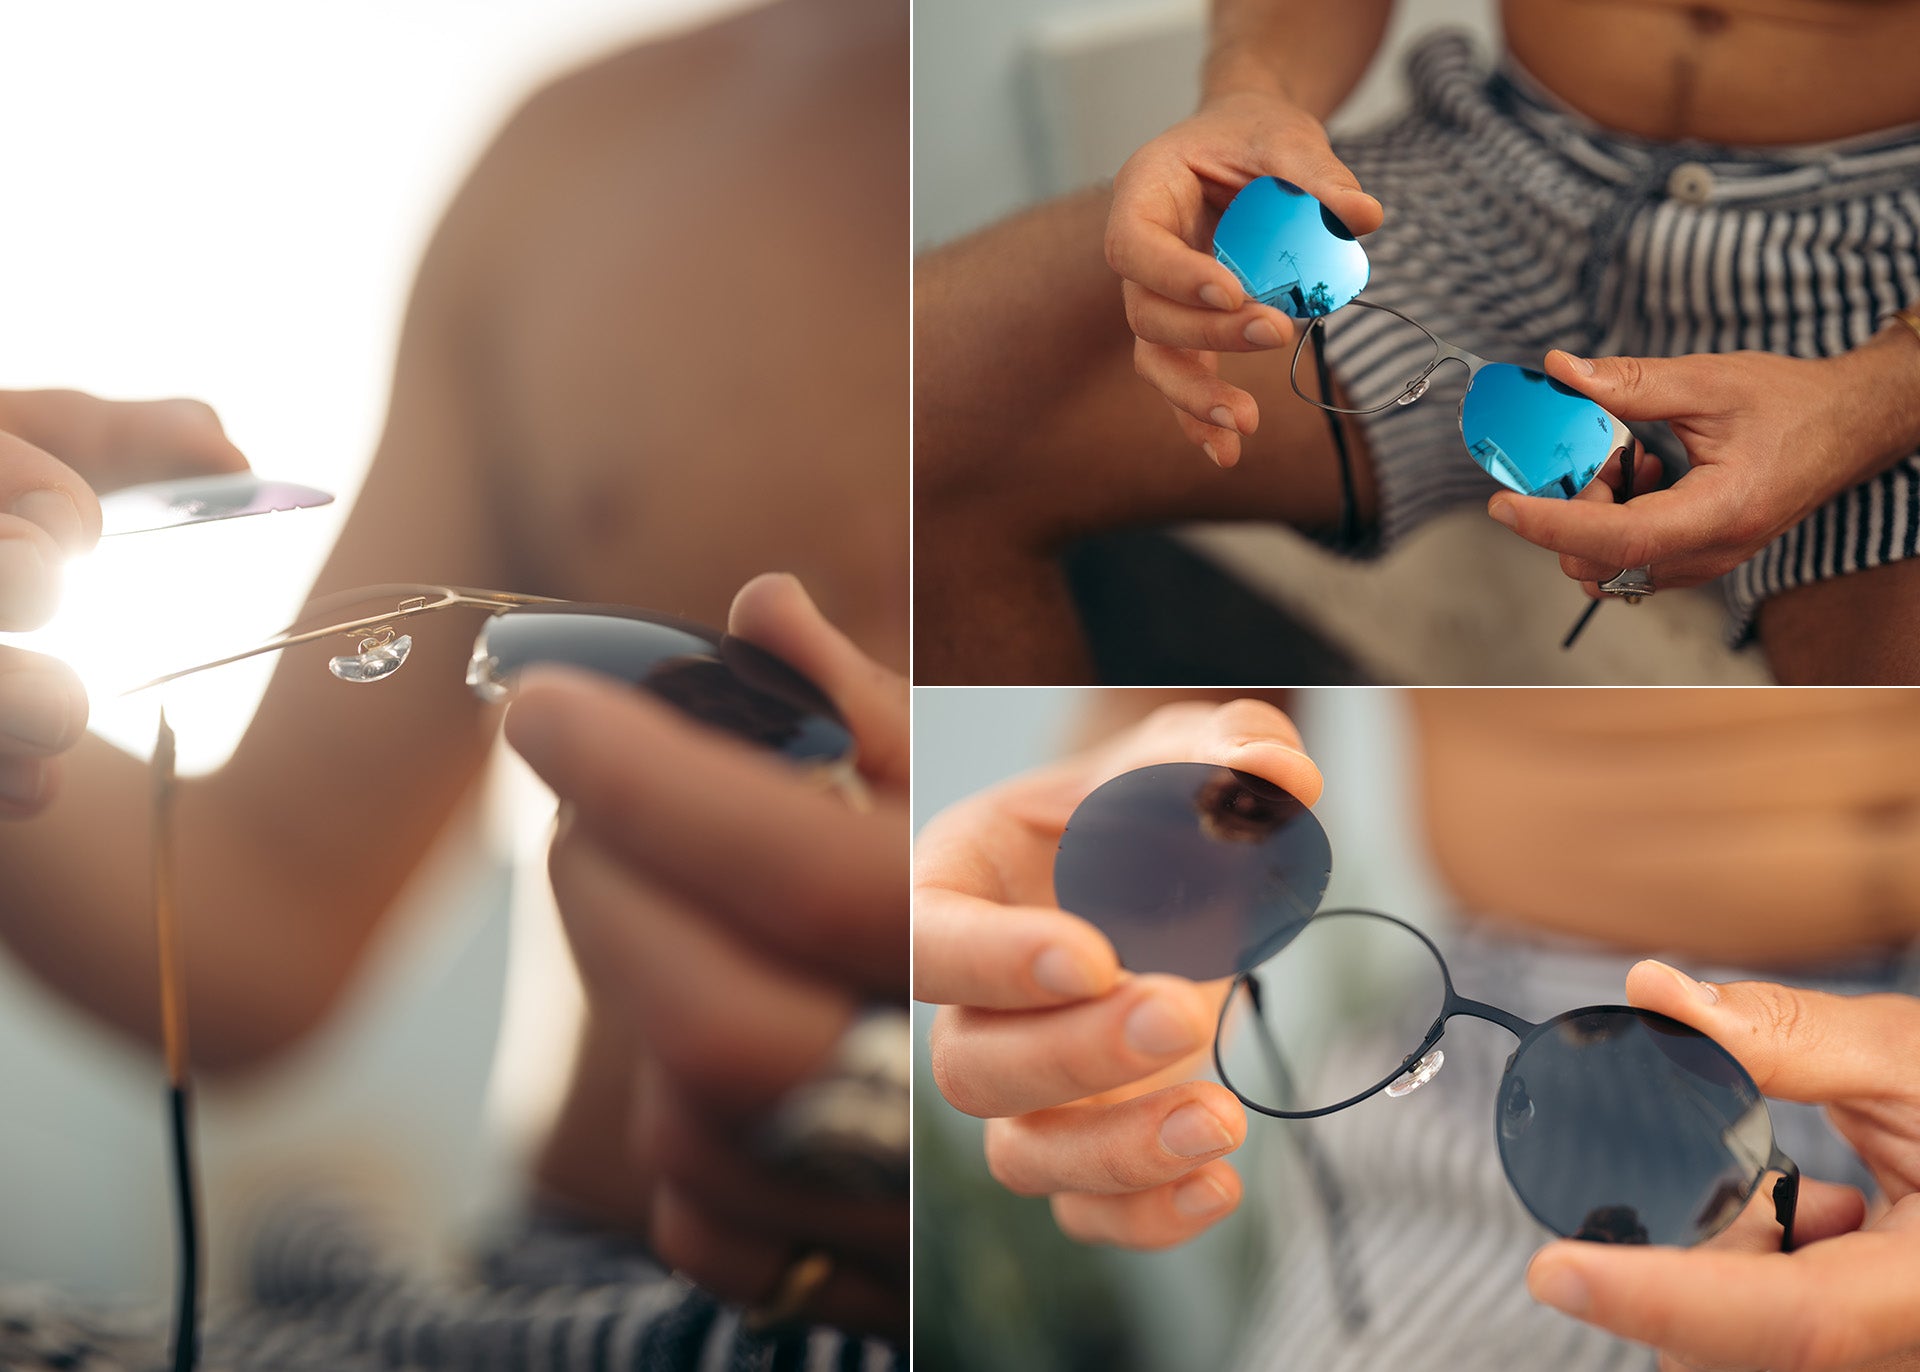 The new lens changing mechanism makes it very easy to change your lenses.